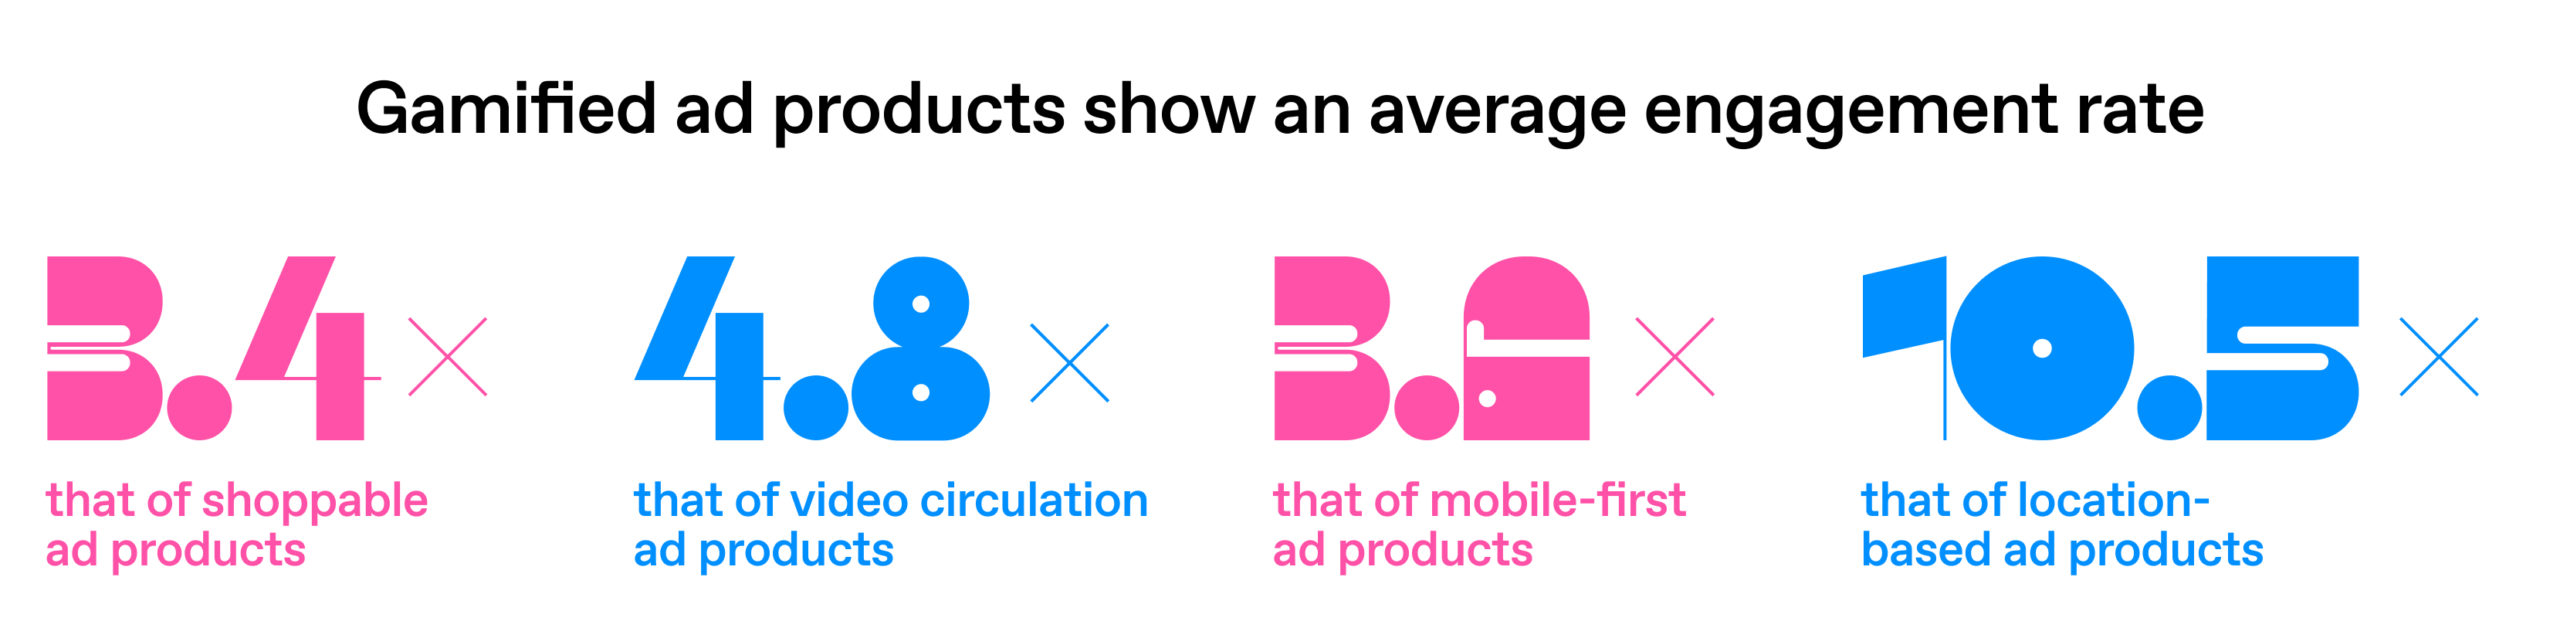 Gamified ad products show an average engagement rate: 3.4x that of shoppable ad products, 4.8x that of video circulation ad products, 3.6x that of mobile-first ad products, 10.5x that of location-based ad products 